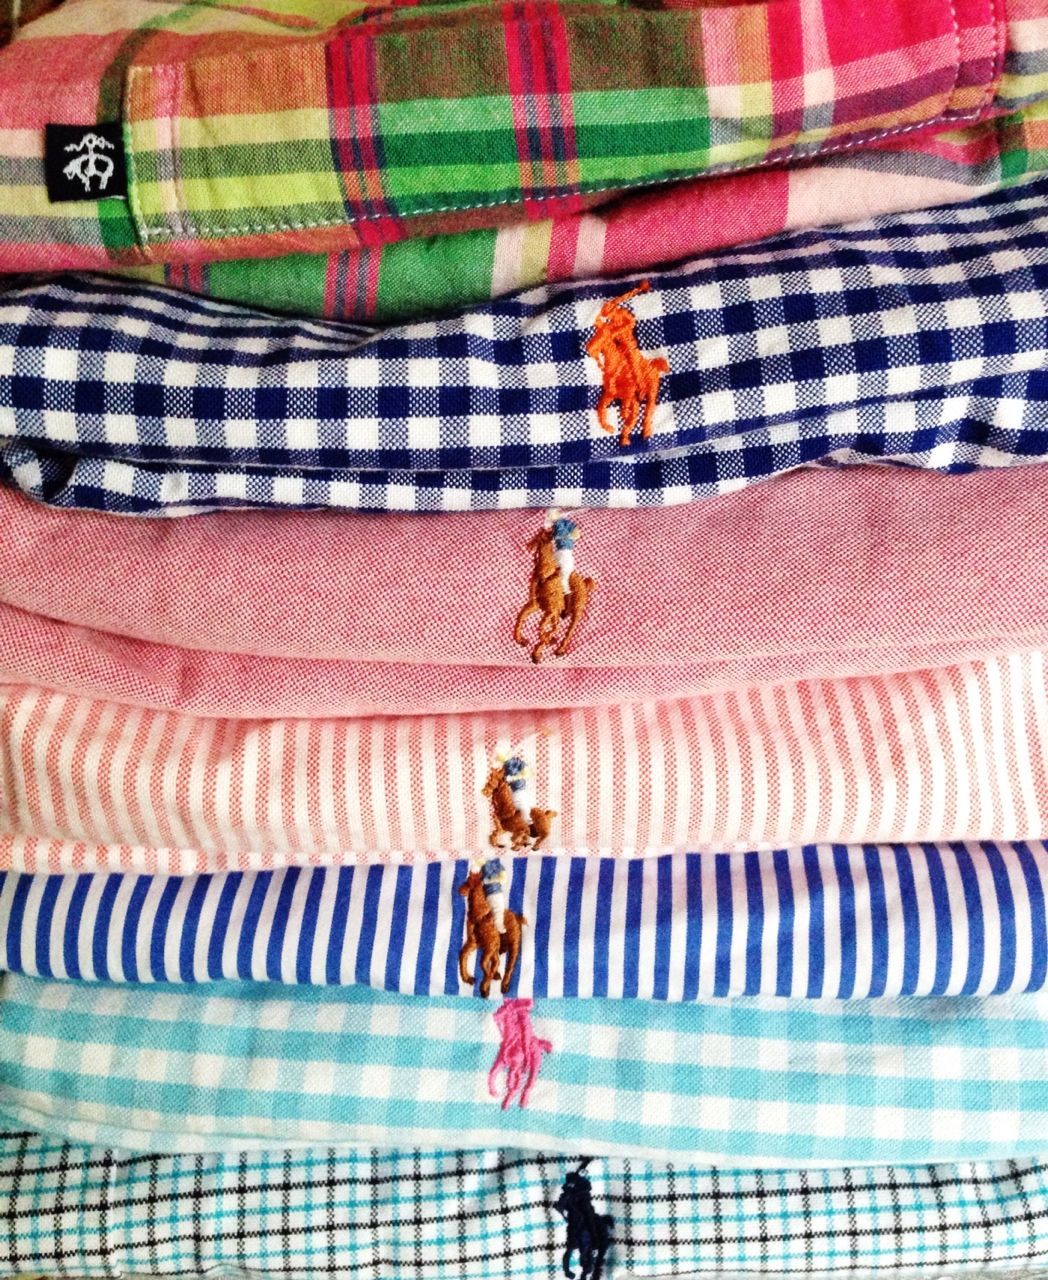 Summer colors from Ralph Lauren…..hes got the vocabulary of East Coast prep down….